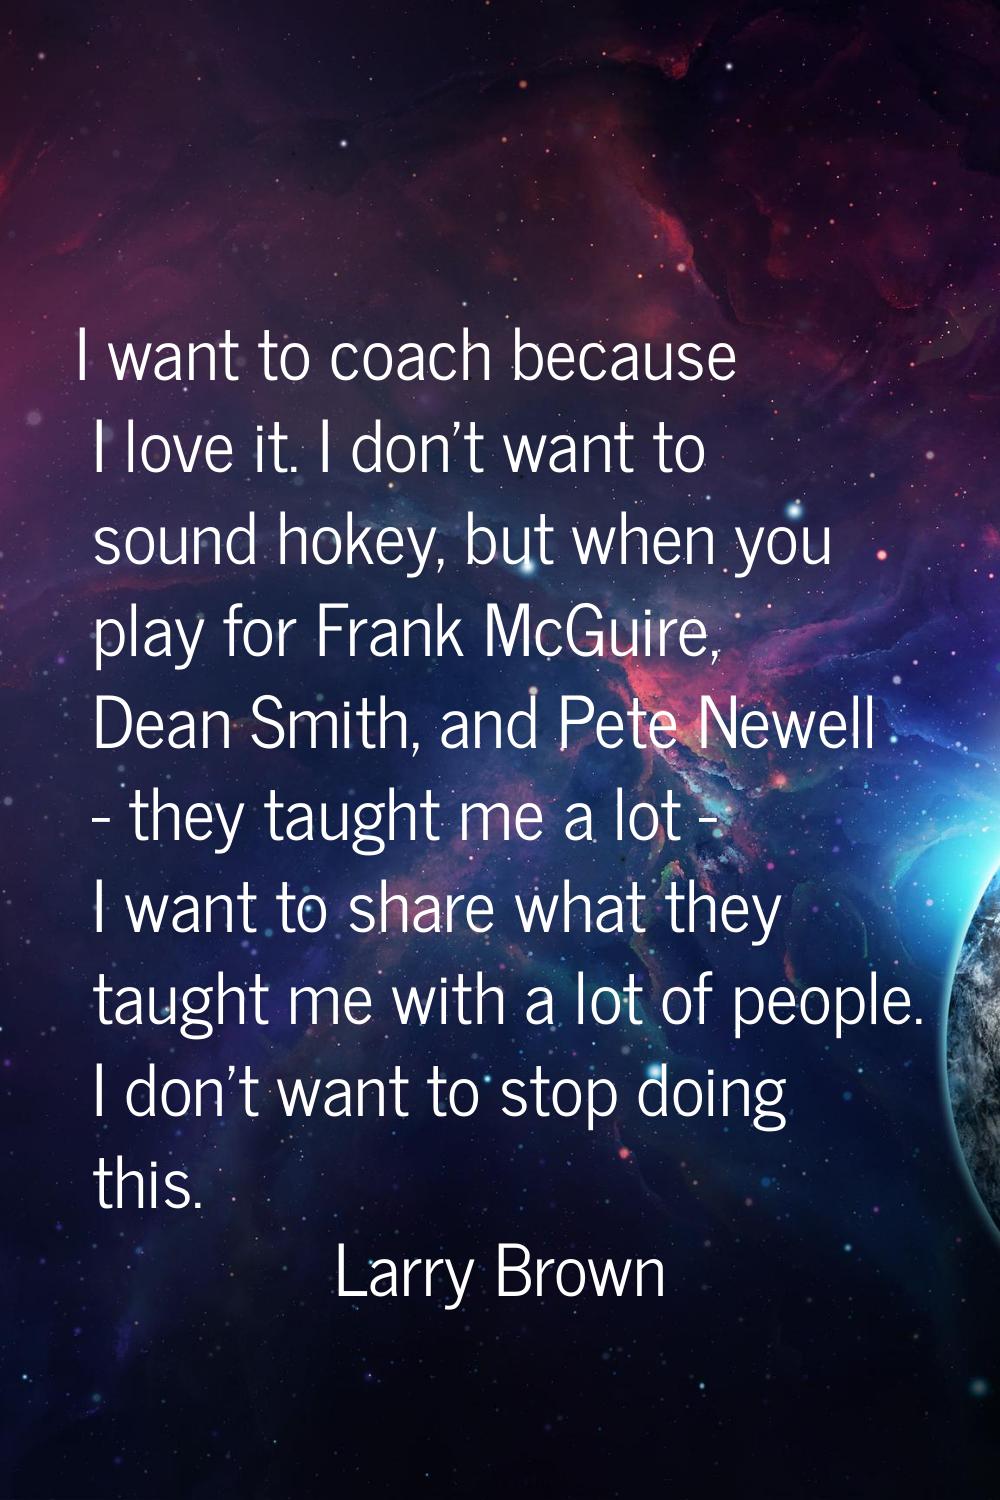 I want to coach because I love it. I don't want to sound hokey, but when you play for Frank McGuire